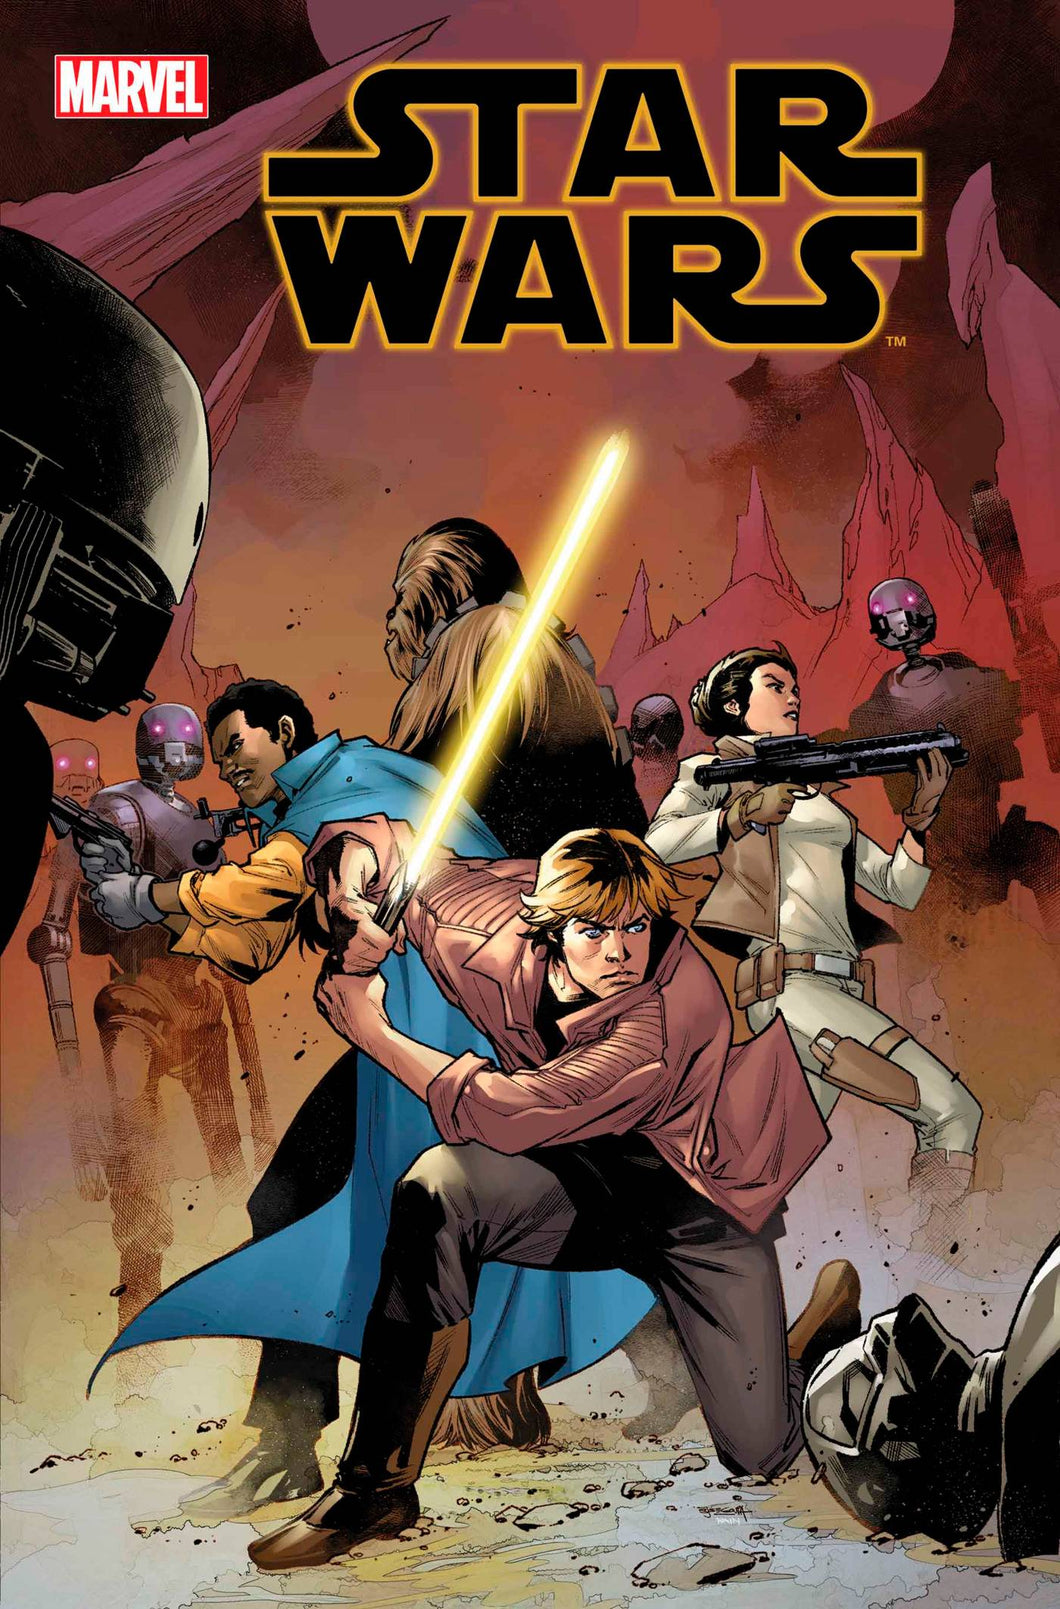 STAR WARS #41 cover